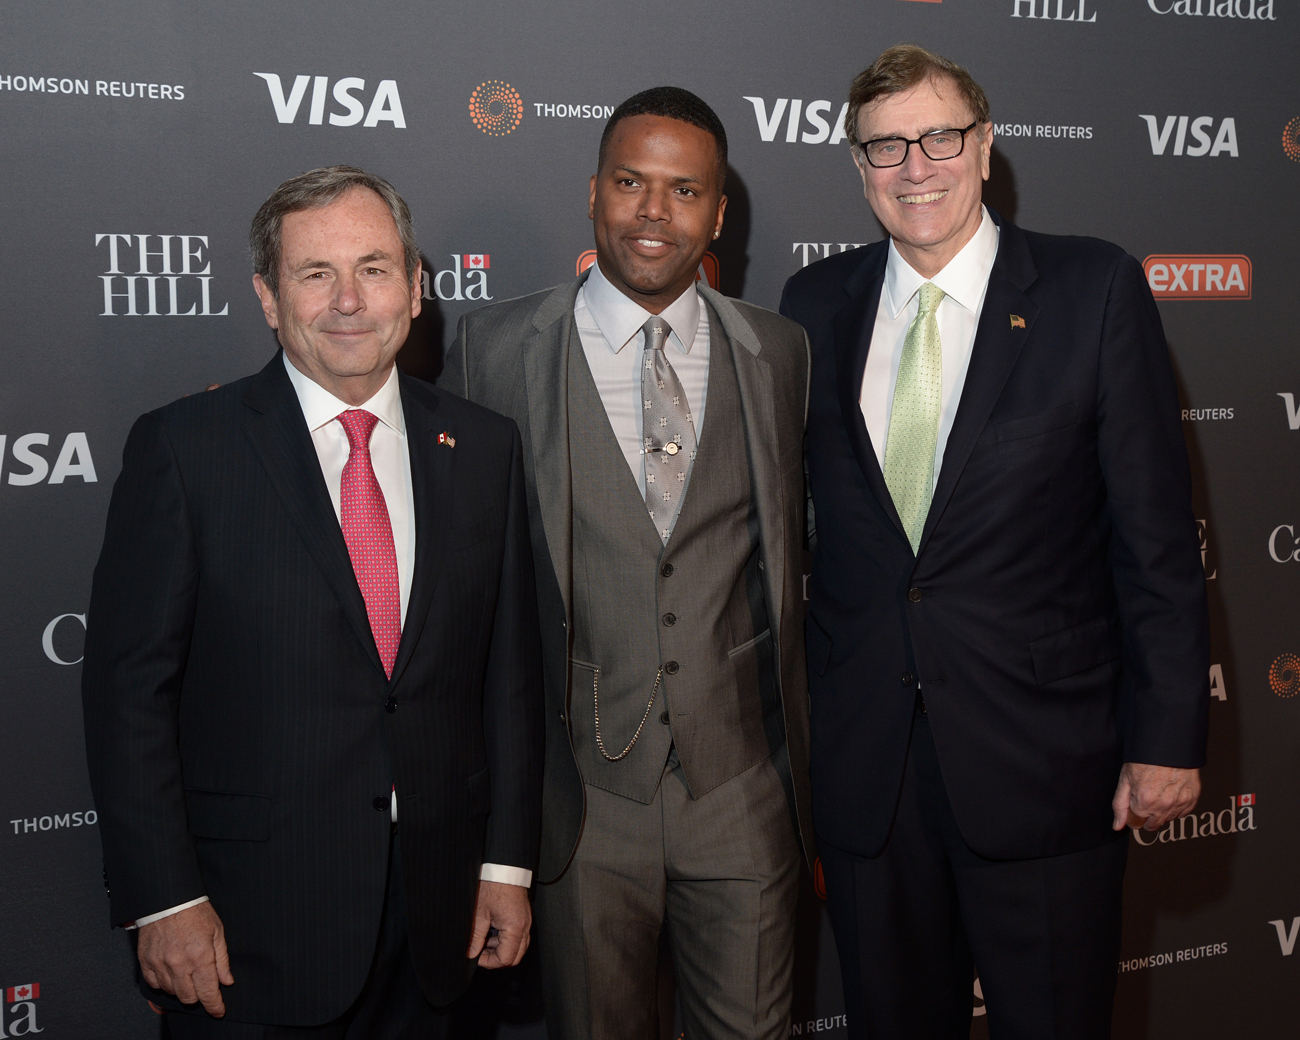 Canadian Ambassador David MacNaughton, Extra's AJ Calloway and The Hill owner Jimmy Finkelstein attend The Hill/Extra/Embassy of Canada WHCD pre-party in Washington D.C. on Friday April 29. (Shannon Finney Photography)